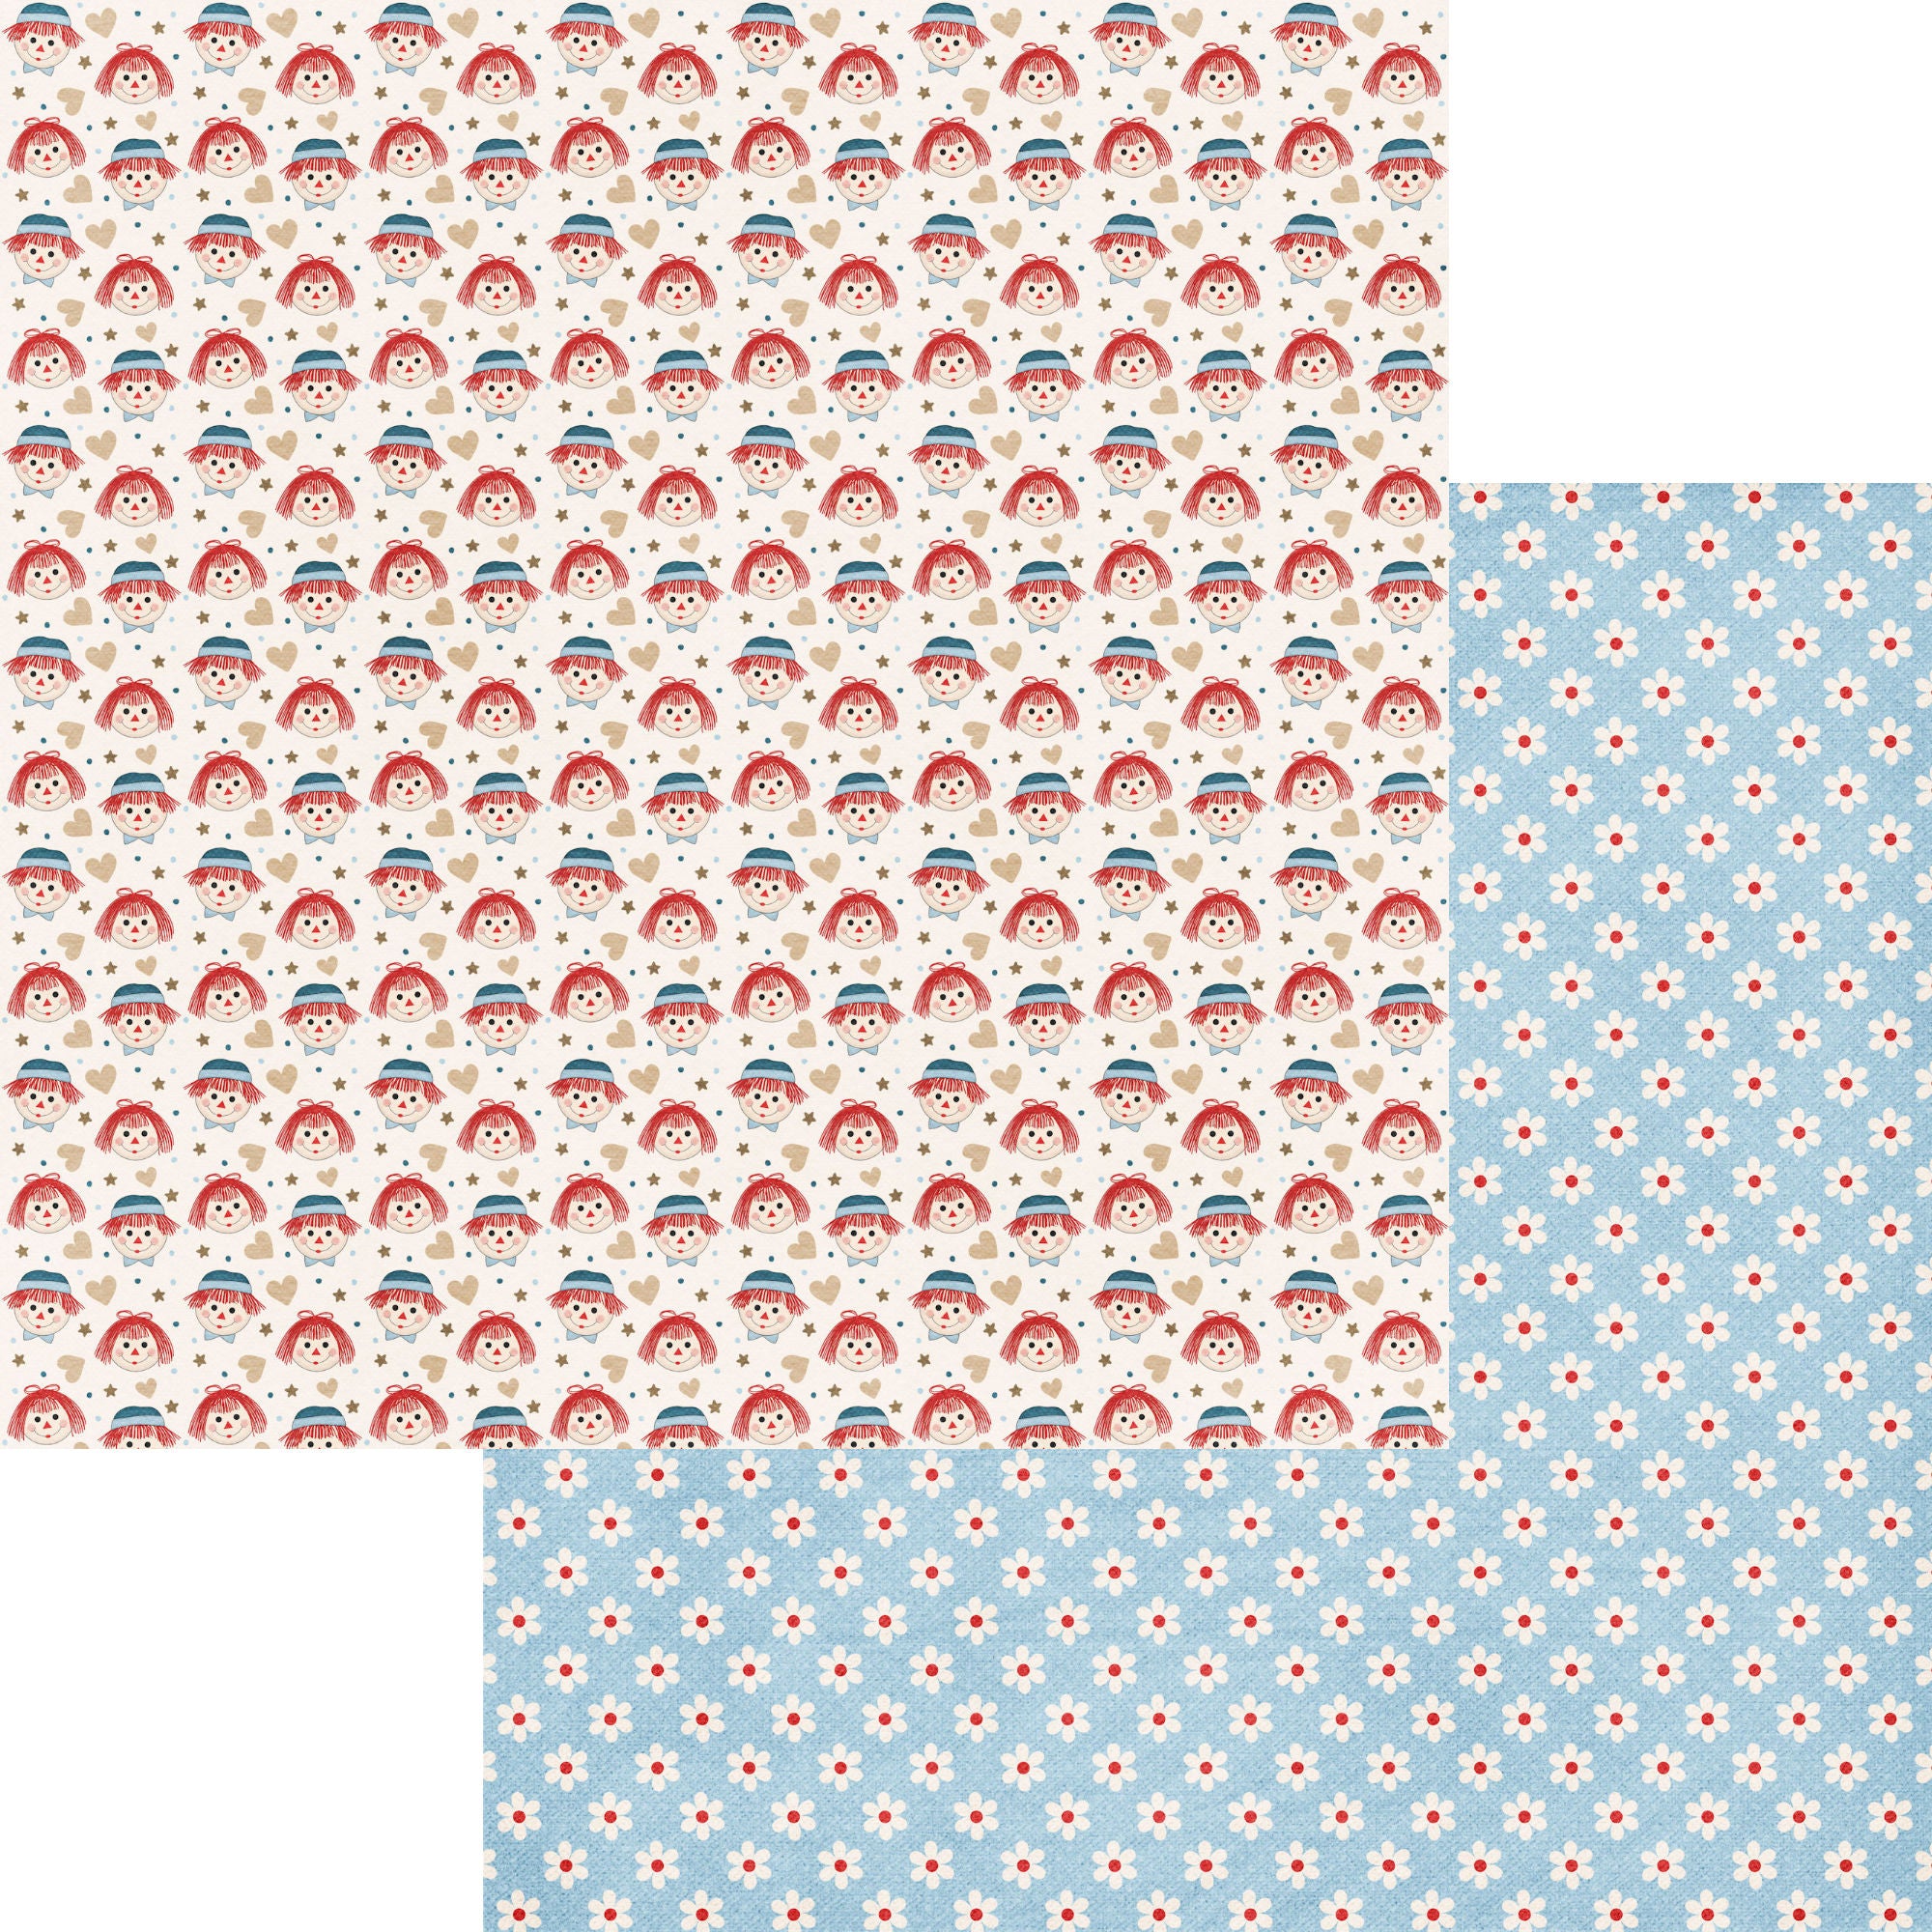 Inspired By Collection Raggedy Dolls 12 x 12 Double-Sided Scrapbook Paper by SSC Designs